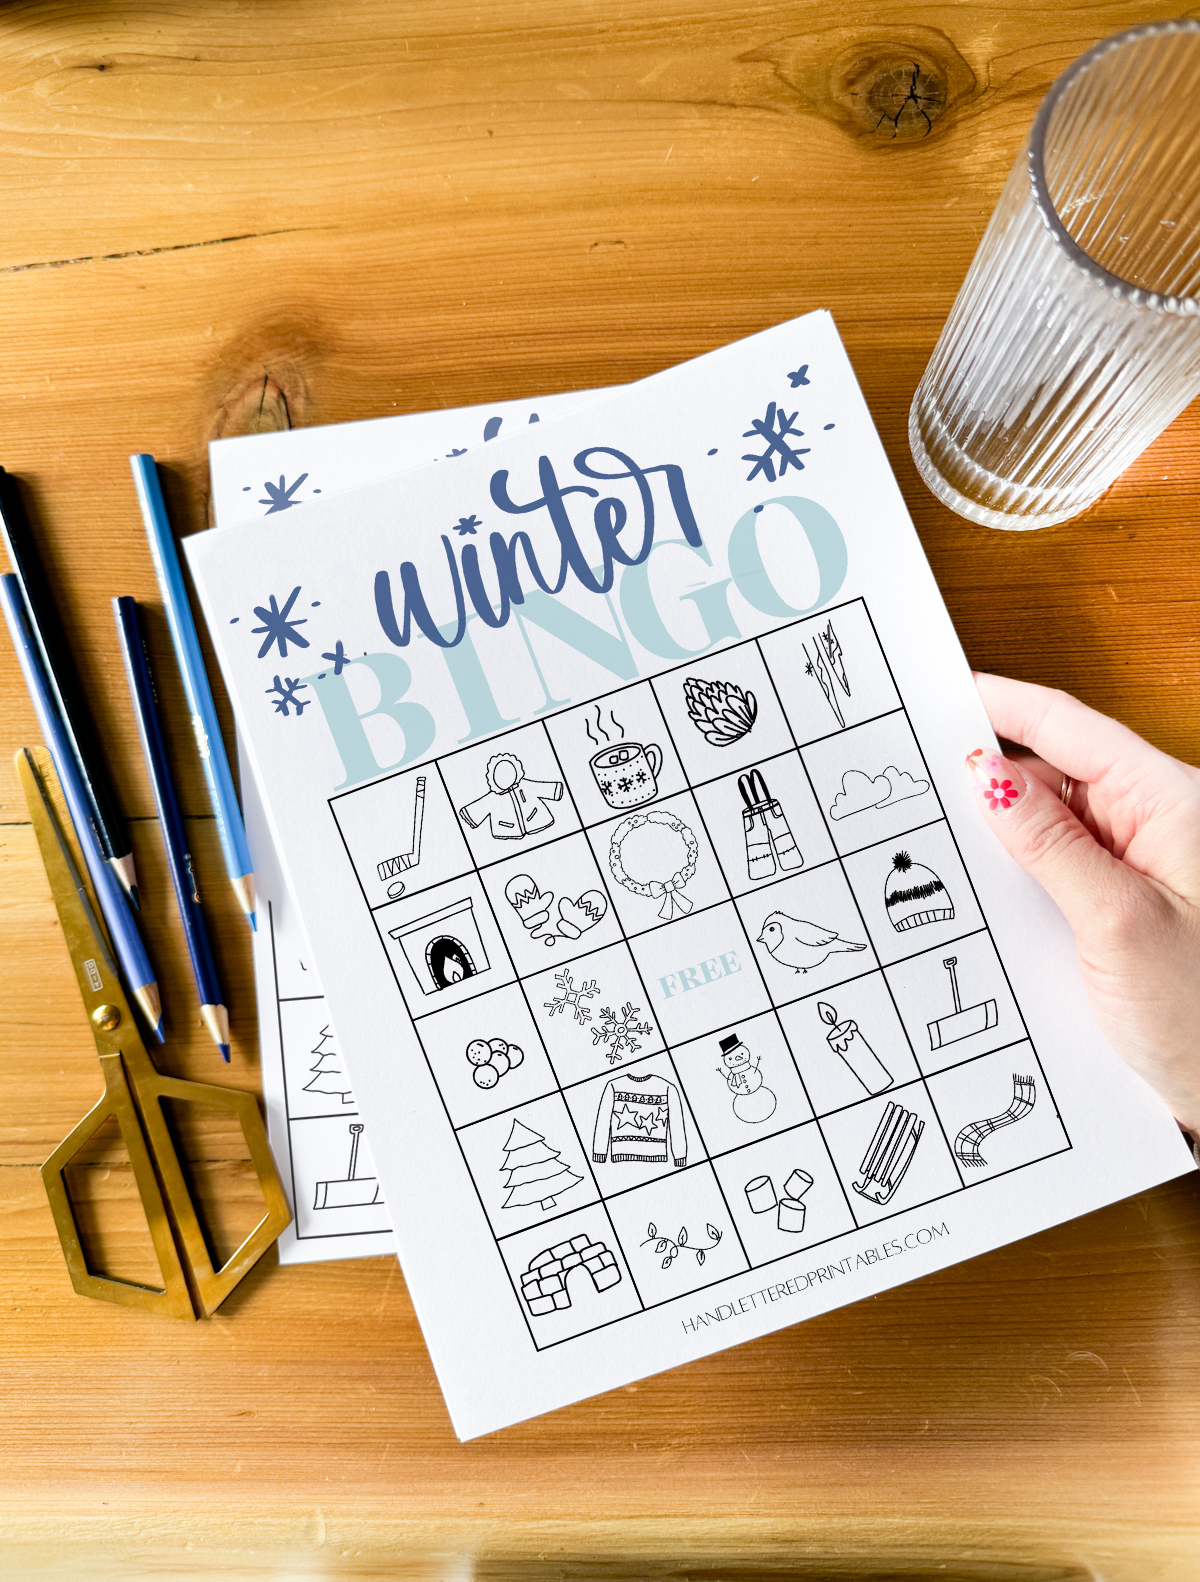 winter bingo card printed and being held above wood table